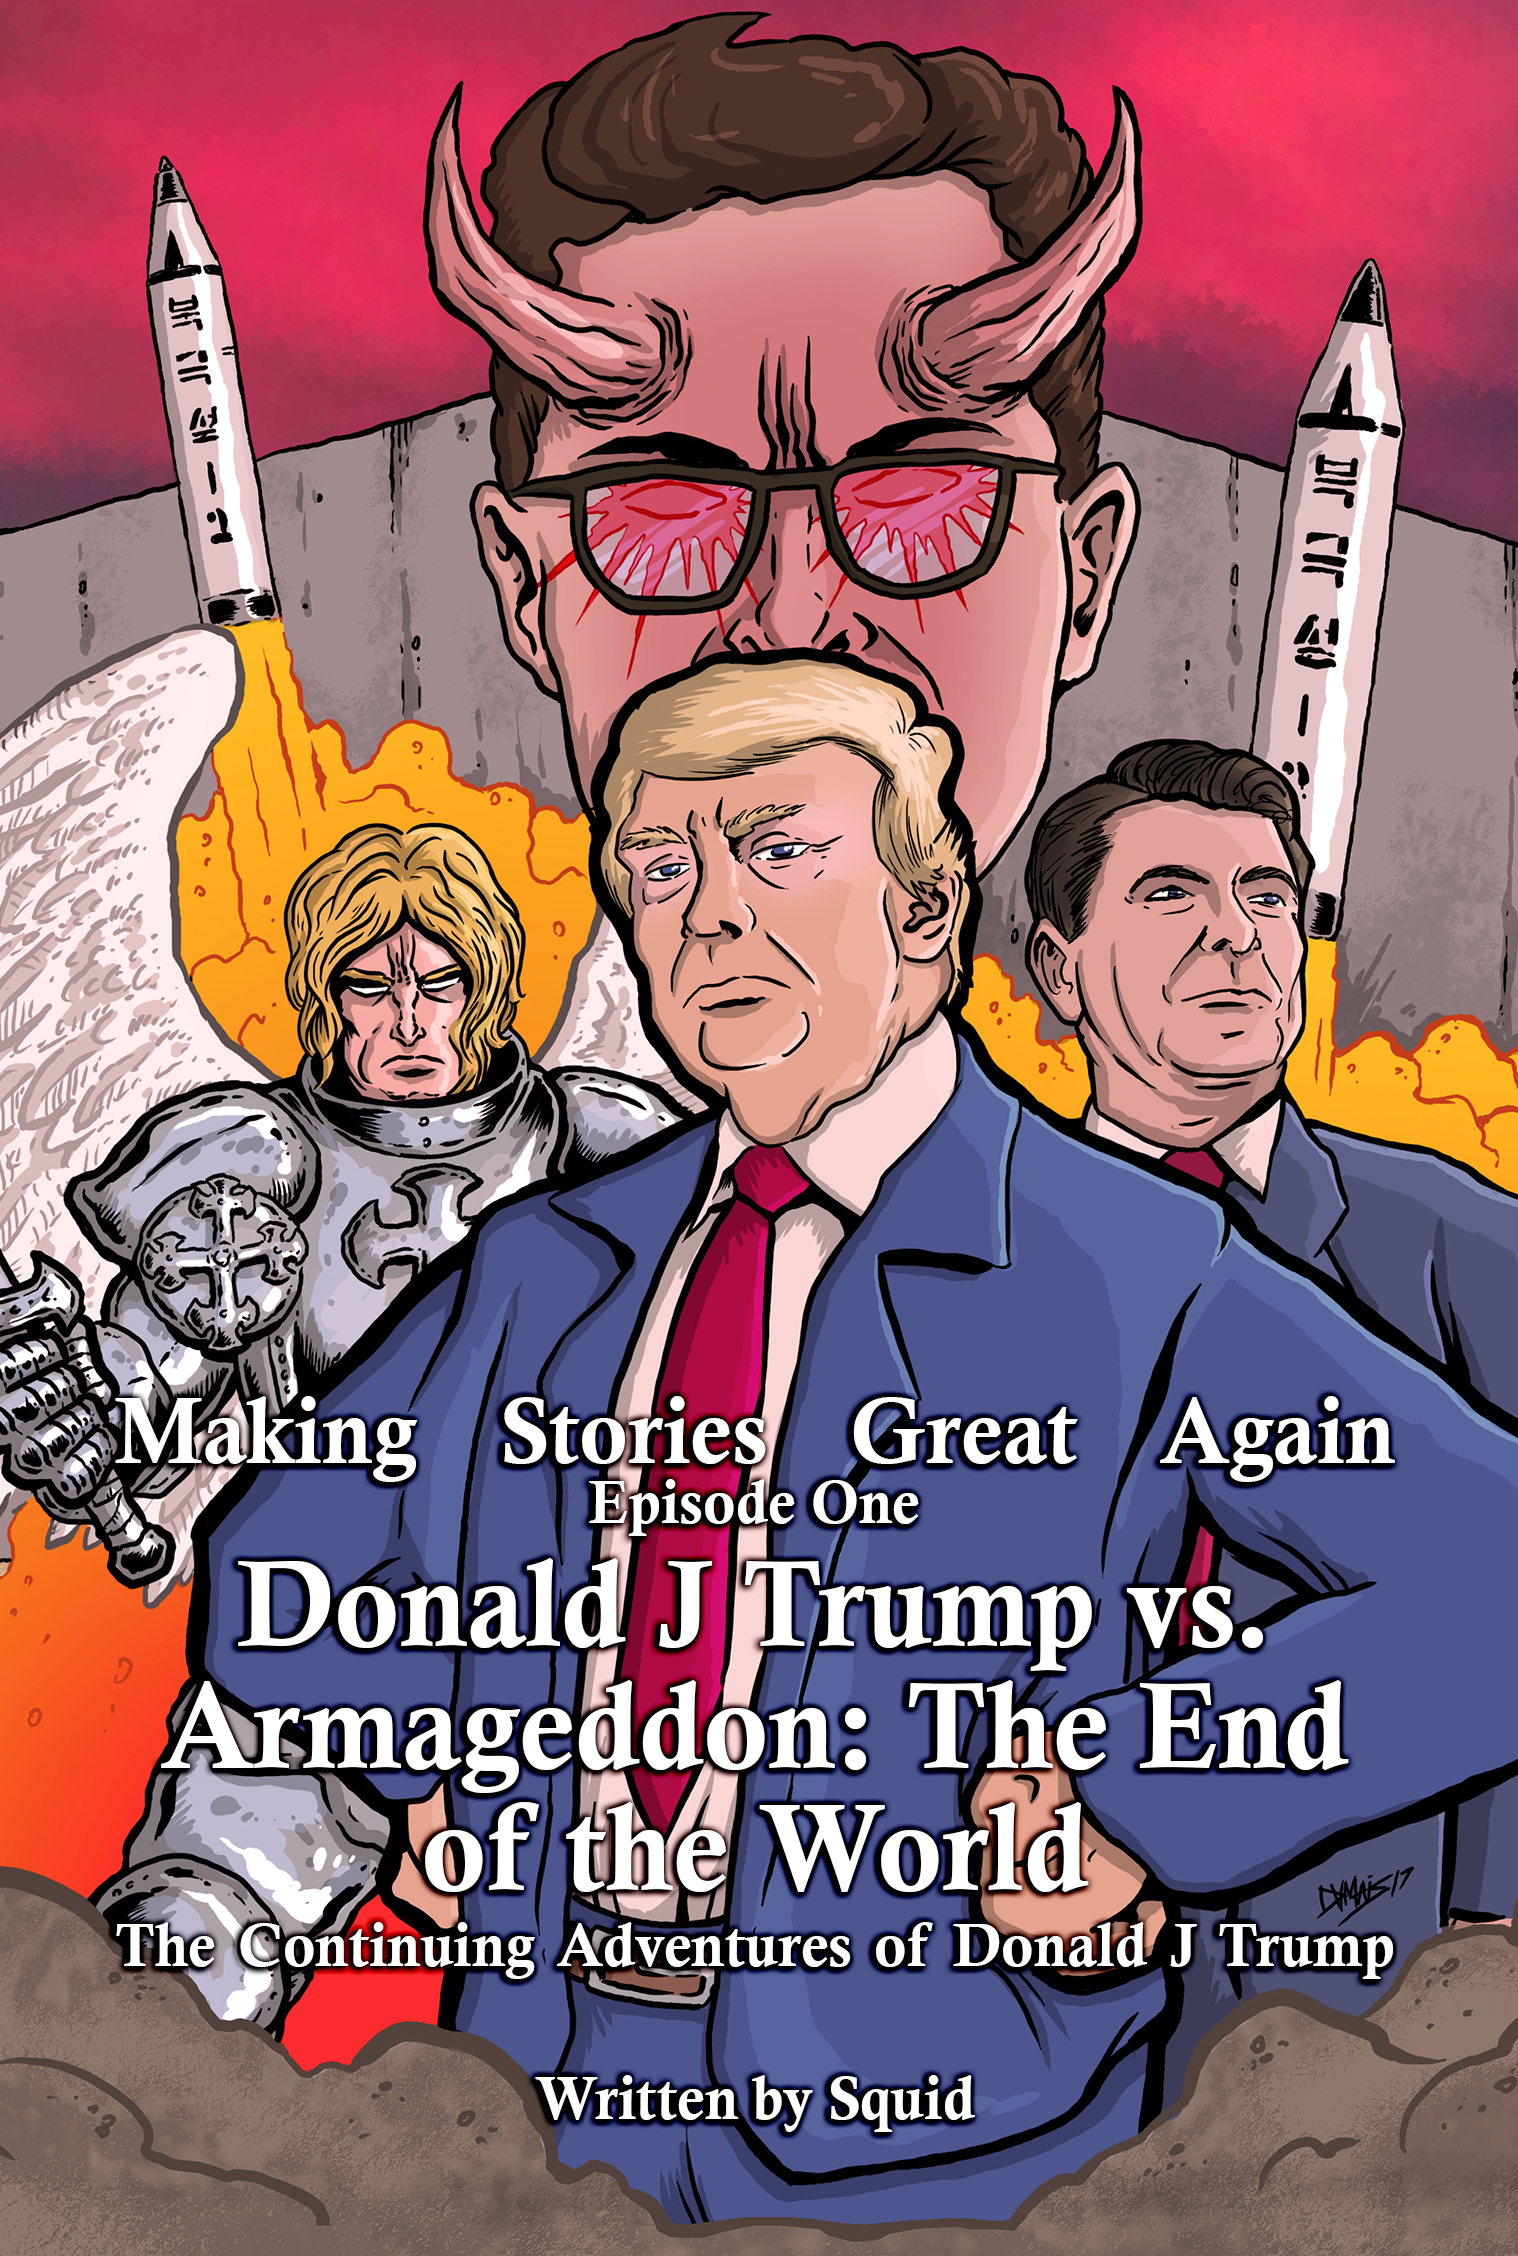 Making Stories Great Again Episode One Donald J Trump vs Armageddon: The End of the World: The Continuing Adventures of Donald J Trump (Book)